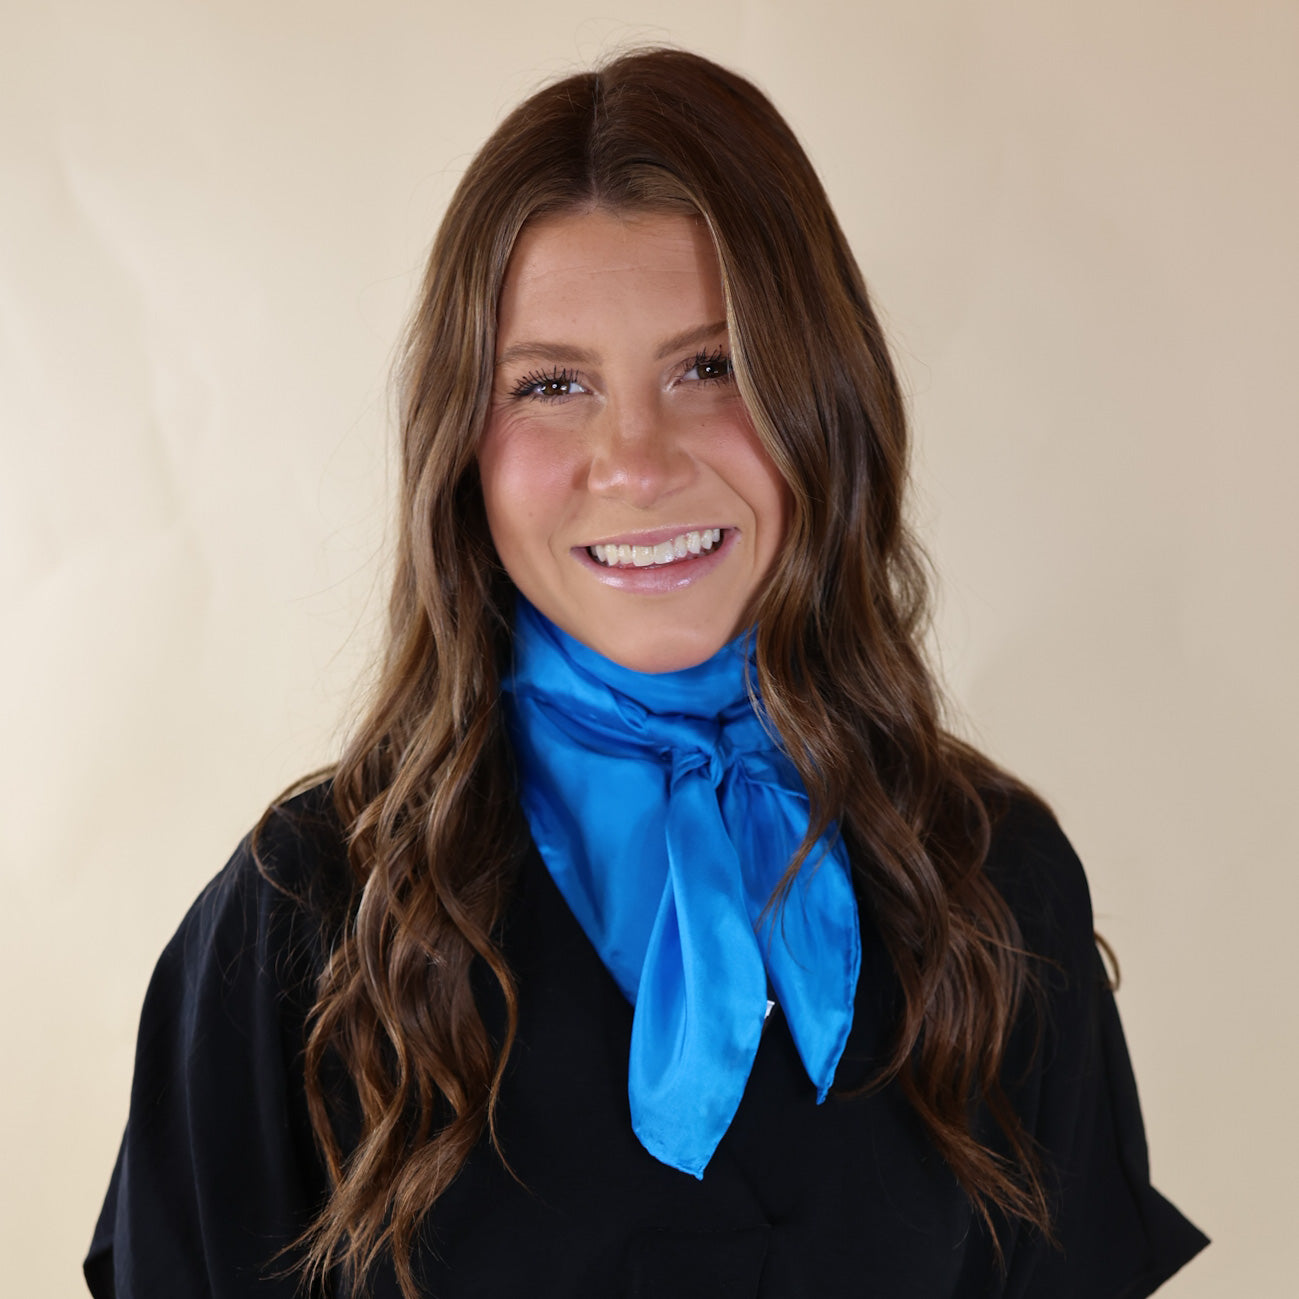 Brunette model is pictured wearing a Black, Drop shoulder top with a Solid Blue scarf tied around her neck. Model is pictured in front of a beige background. 